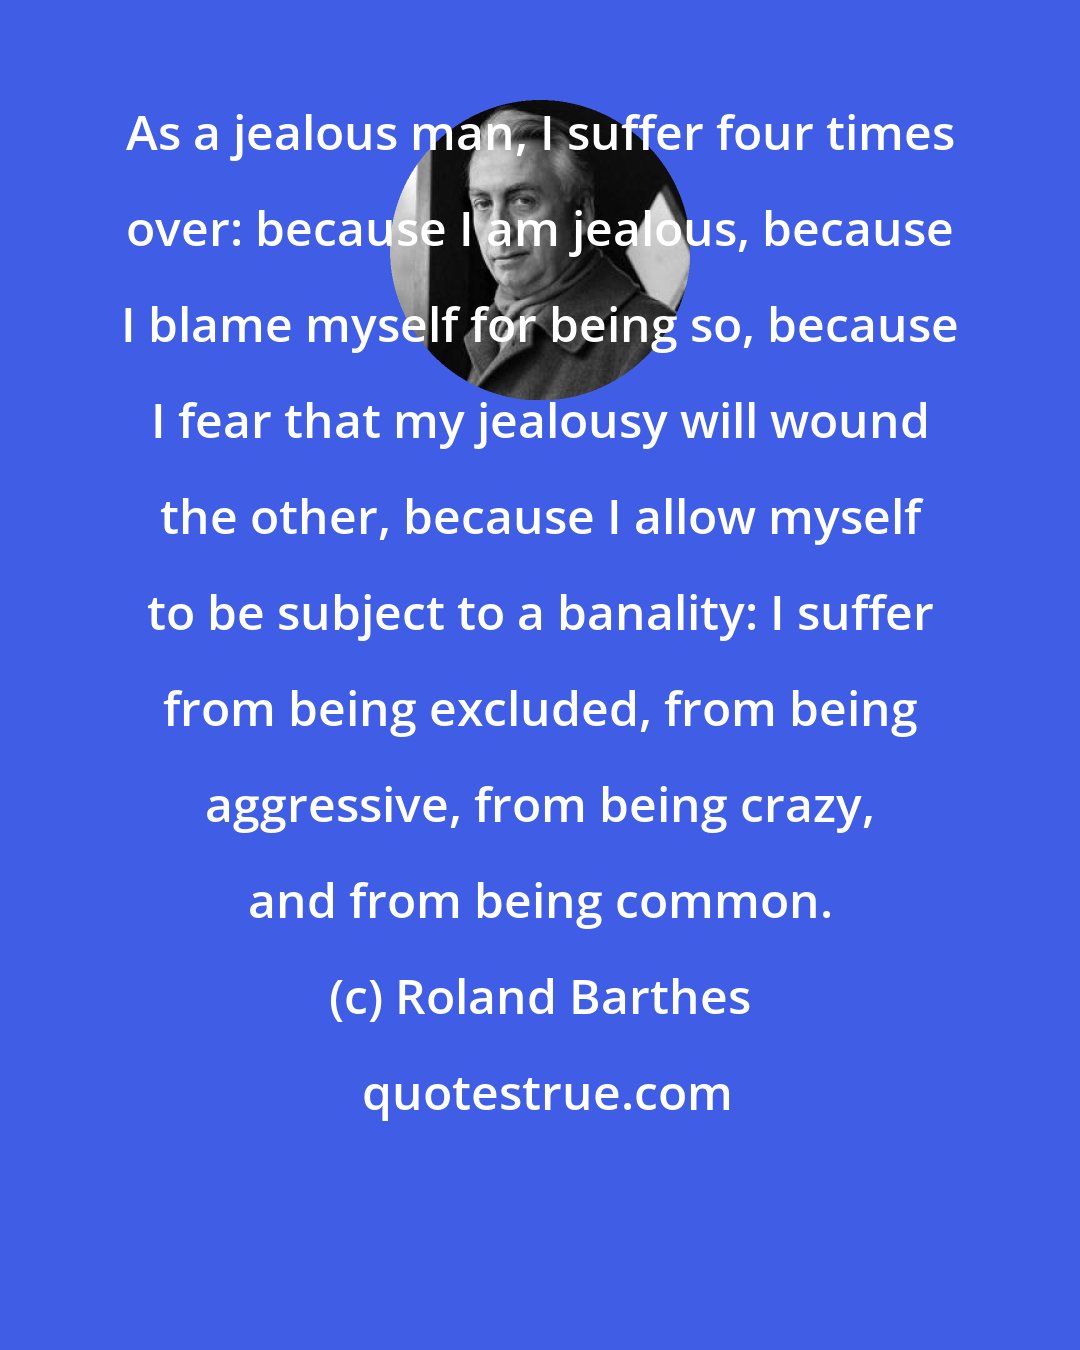 Roland Barthes: As a jealous man, I suffer four times over: because I am jealous, because I blame myself for being so, because I fear that my jealousy will wound the other, because I allow myself to be subject to a banality: I suffer from being excluded, from being aggressive, from being crazy, and from being common.